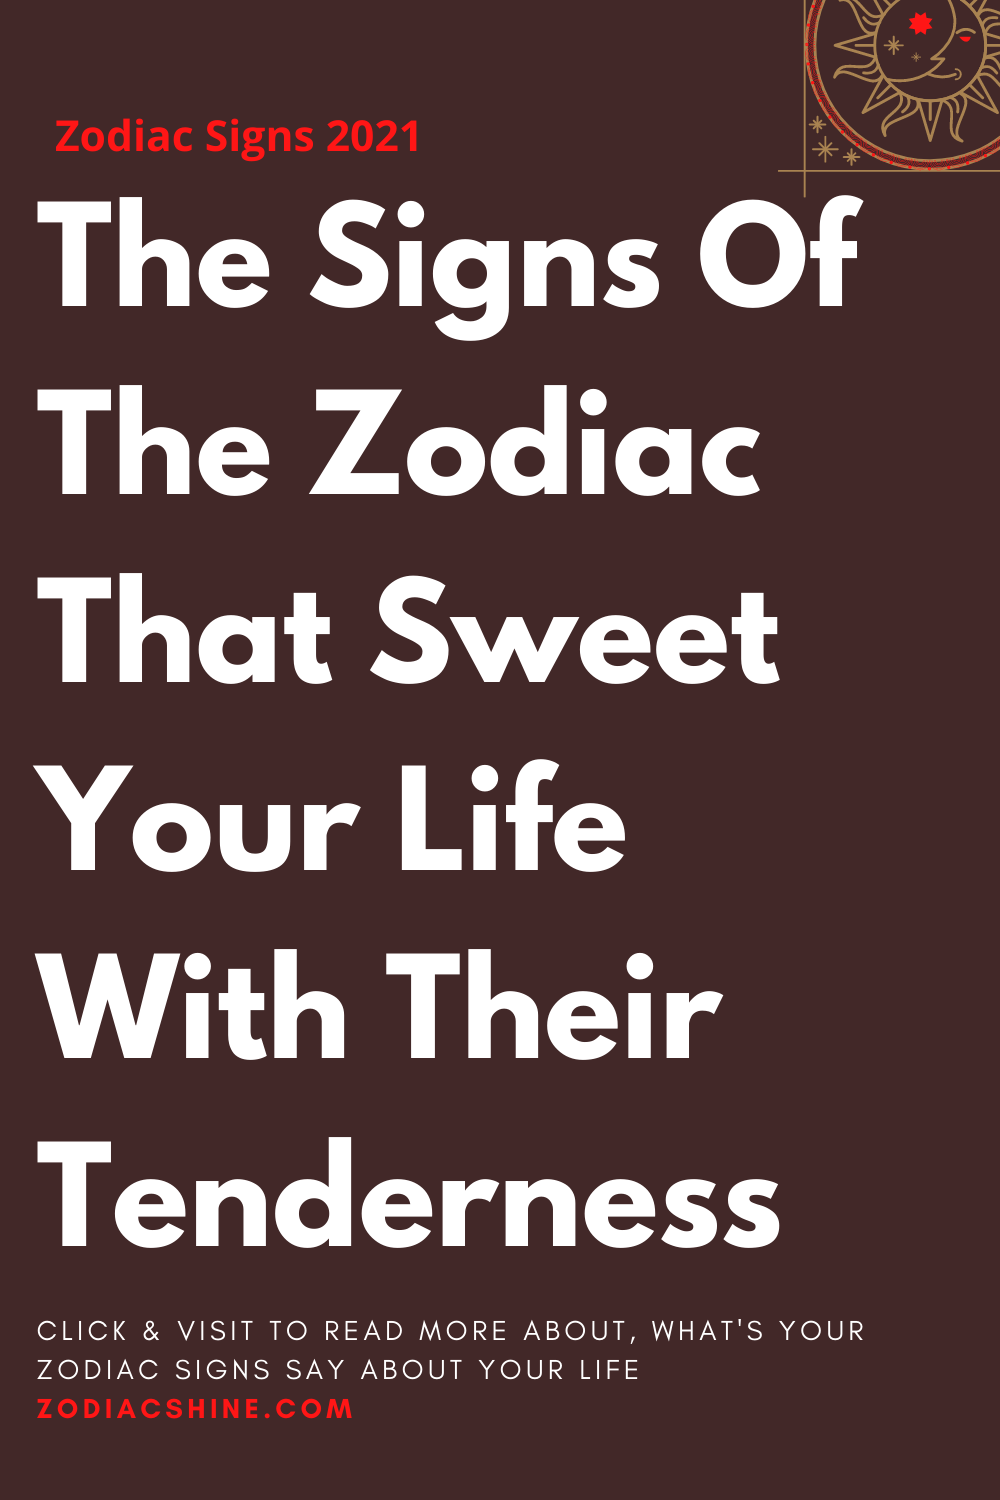 The Signs Of The Zodiac That Sweet Your Life With Their Tenderness